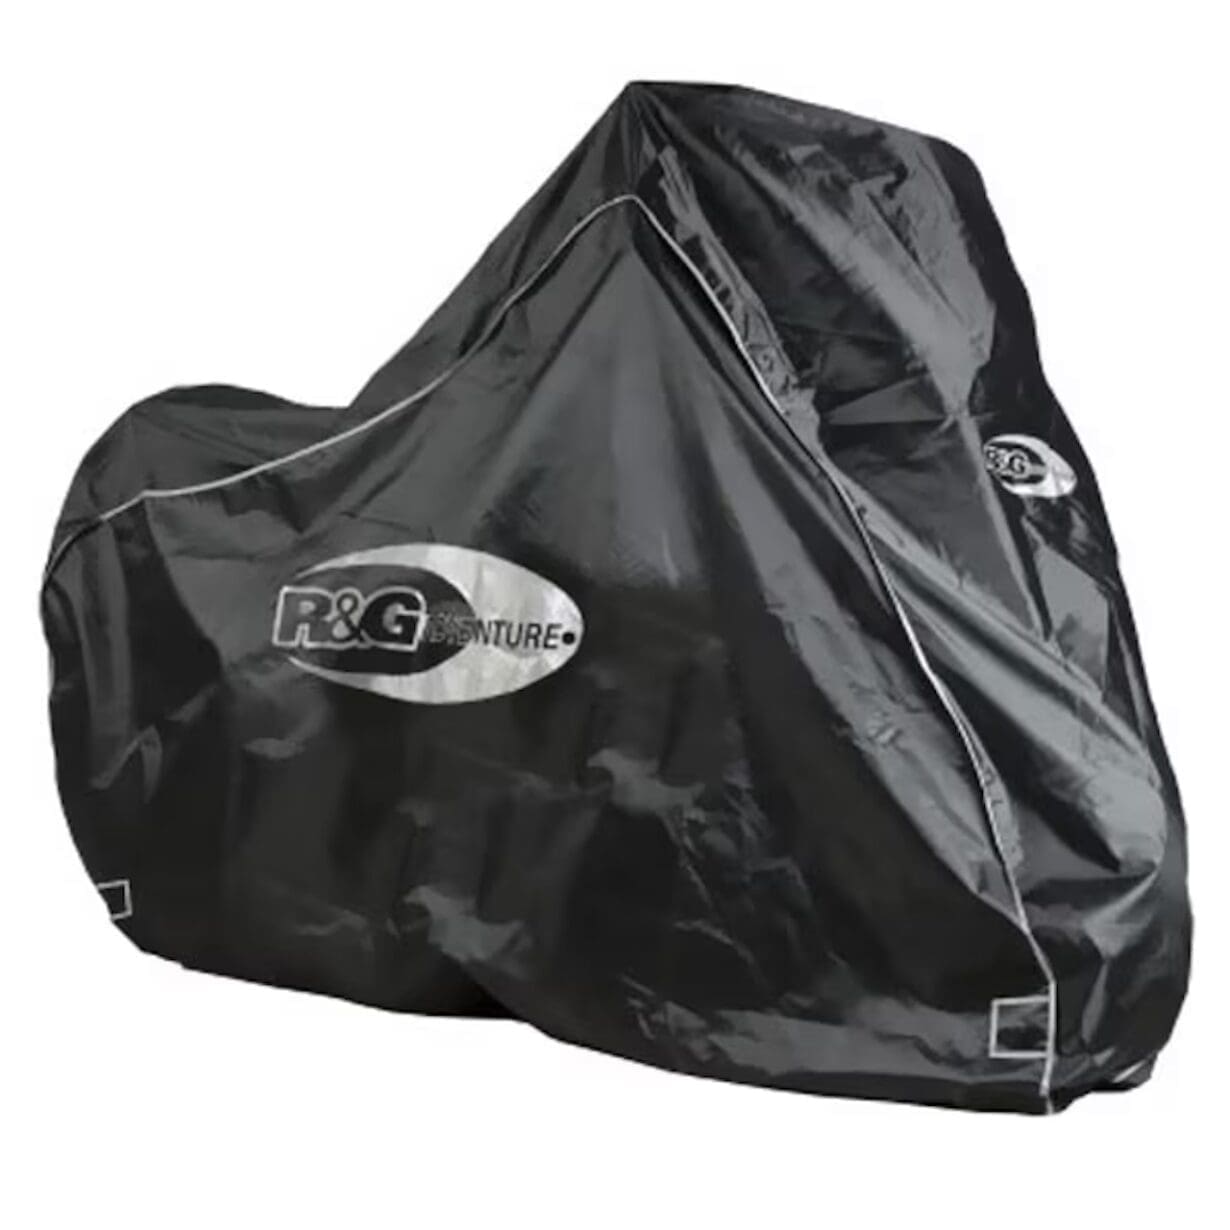 R&G Motorcycle Cover